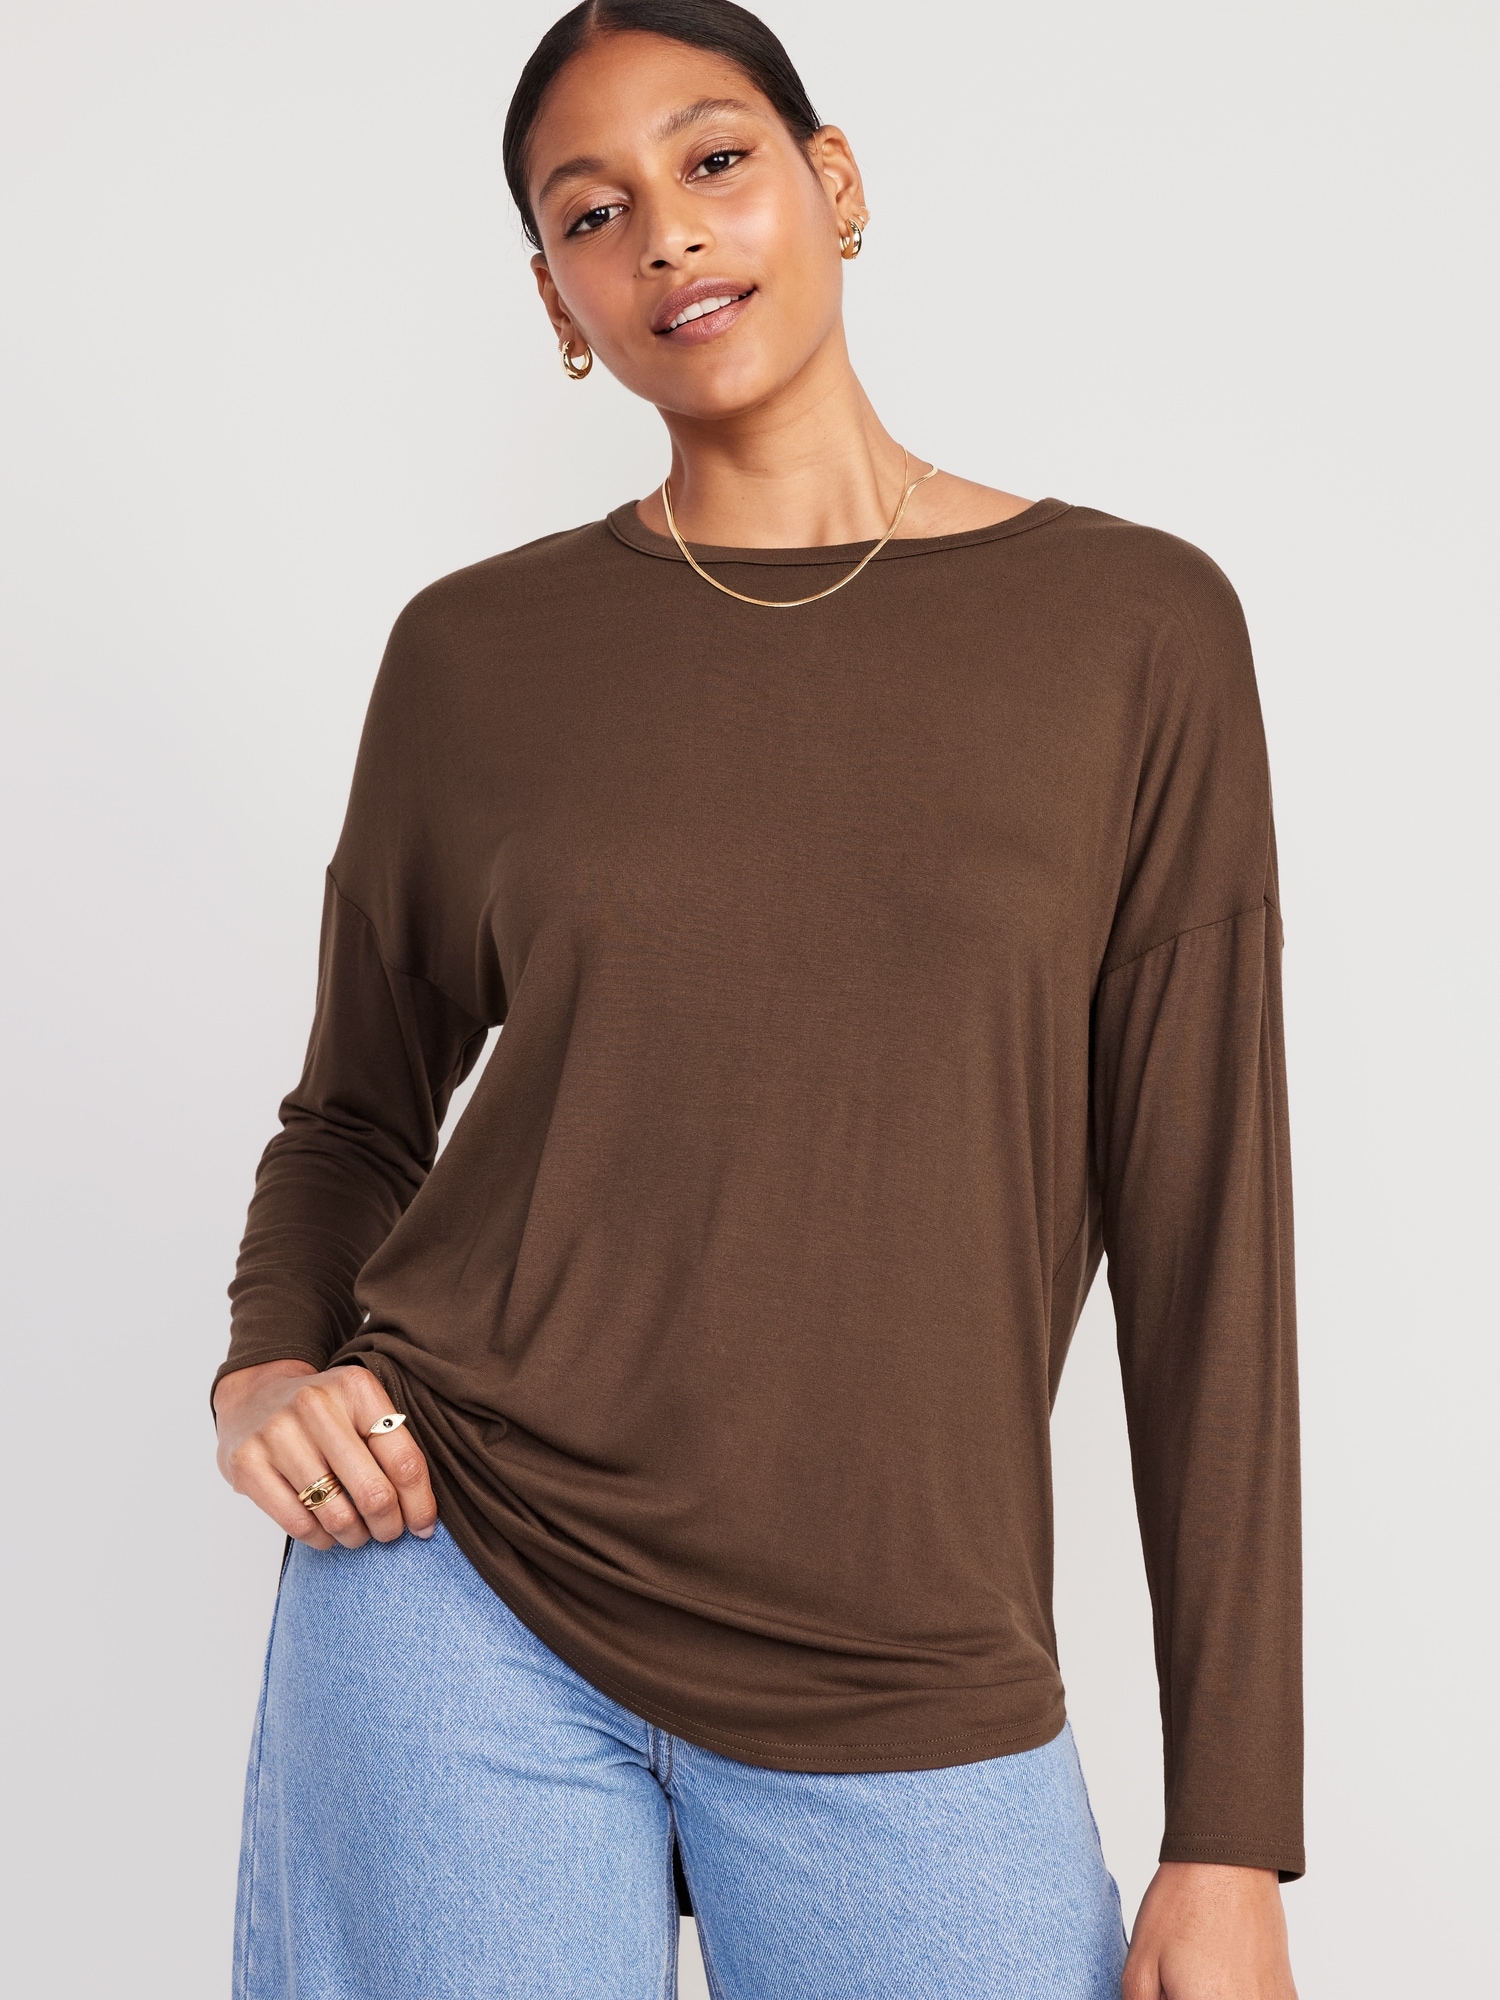 Tunics Or Tops To Wear With Leggings For Work Womens Long Sleeve Shirts S :  : Clothing, Shoes & Accessories